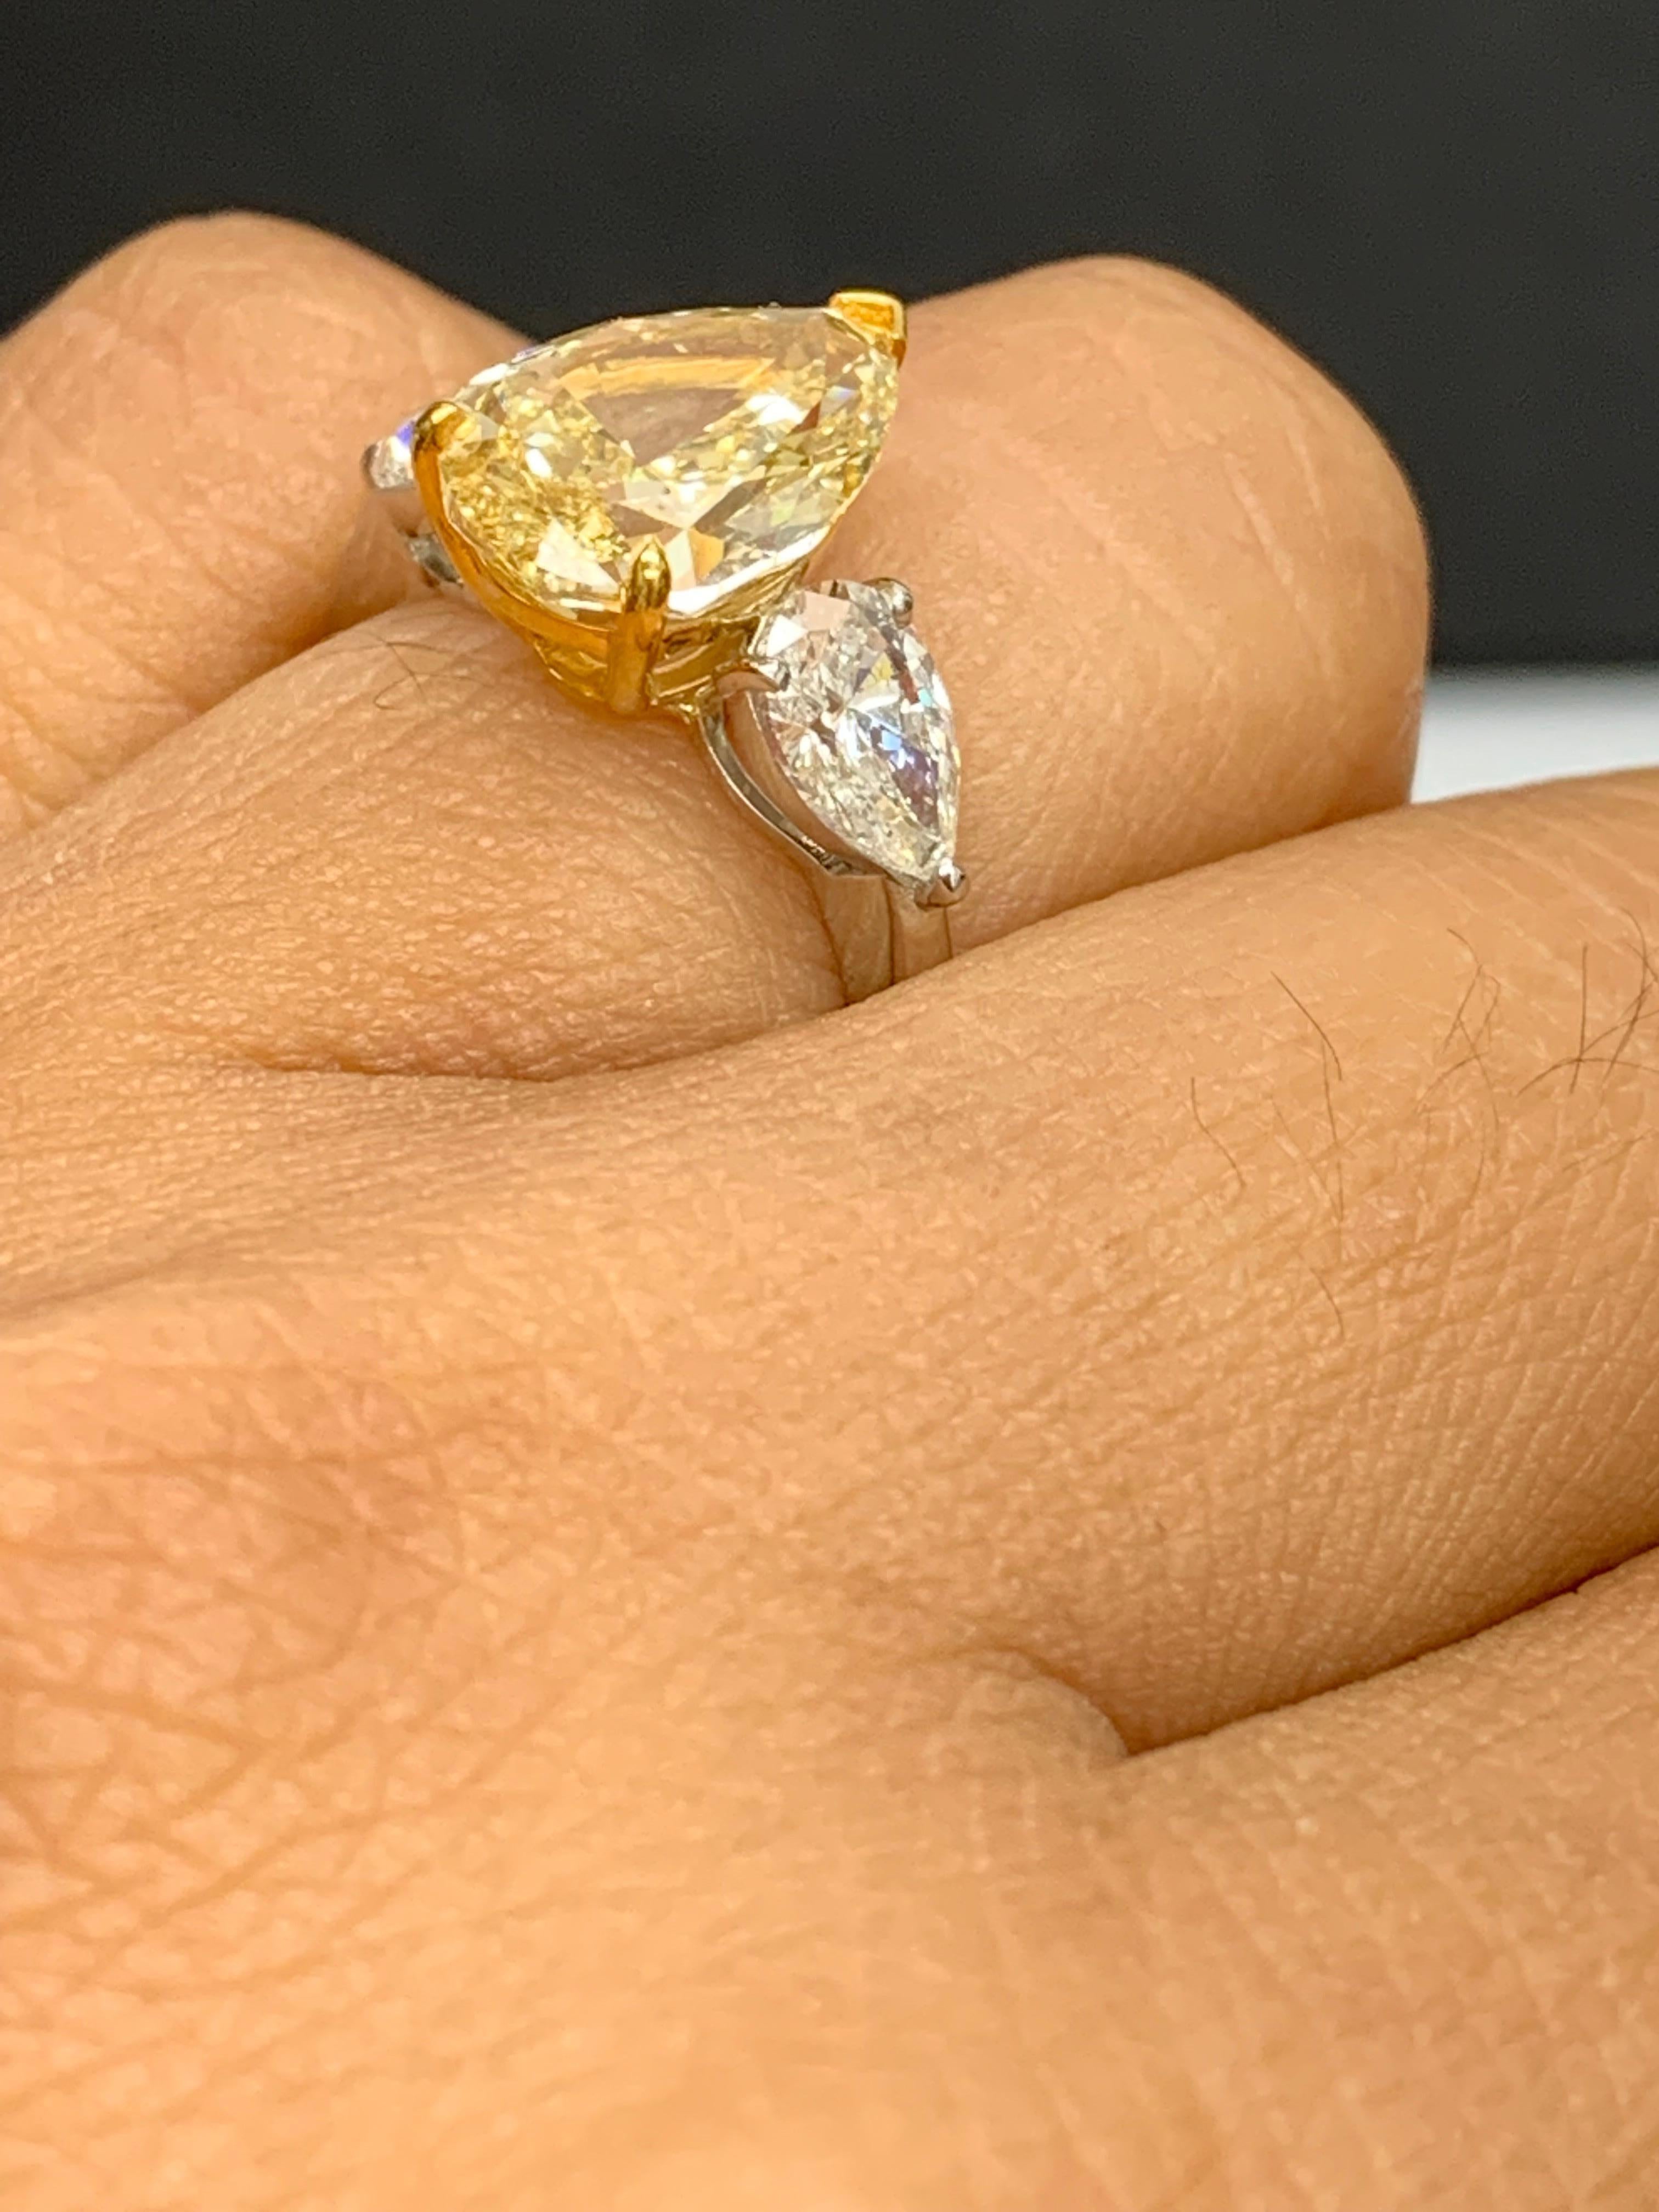 3.15 Carat Pear Shape Fancy Yellow Diamond 3 Stone Ring in Platinum For Sale 4